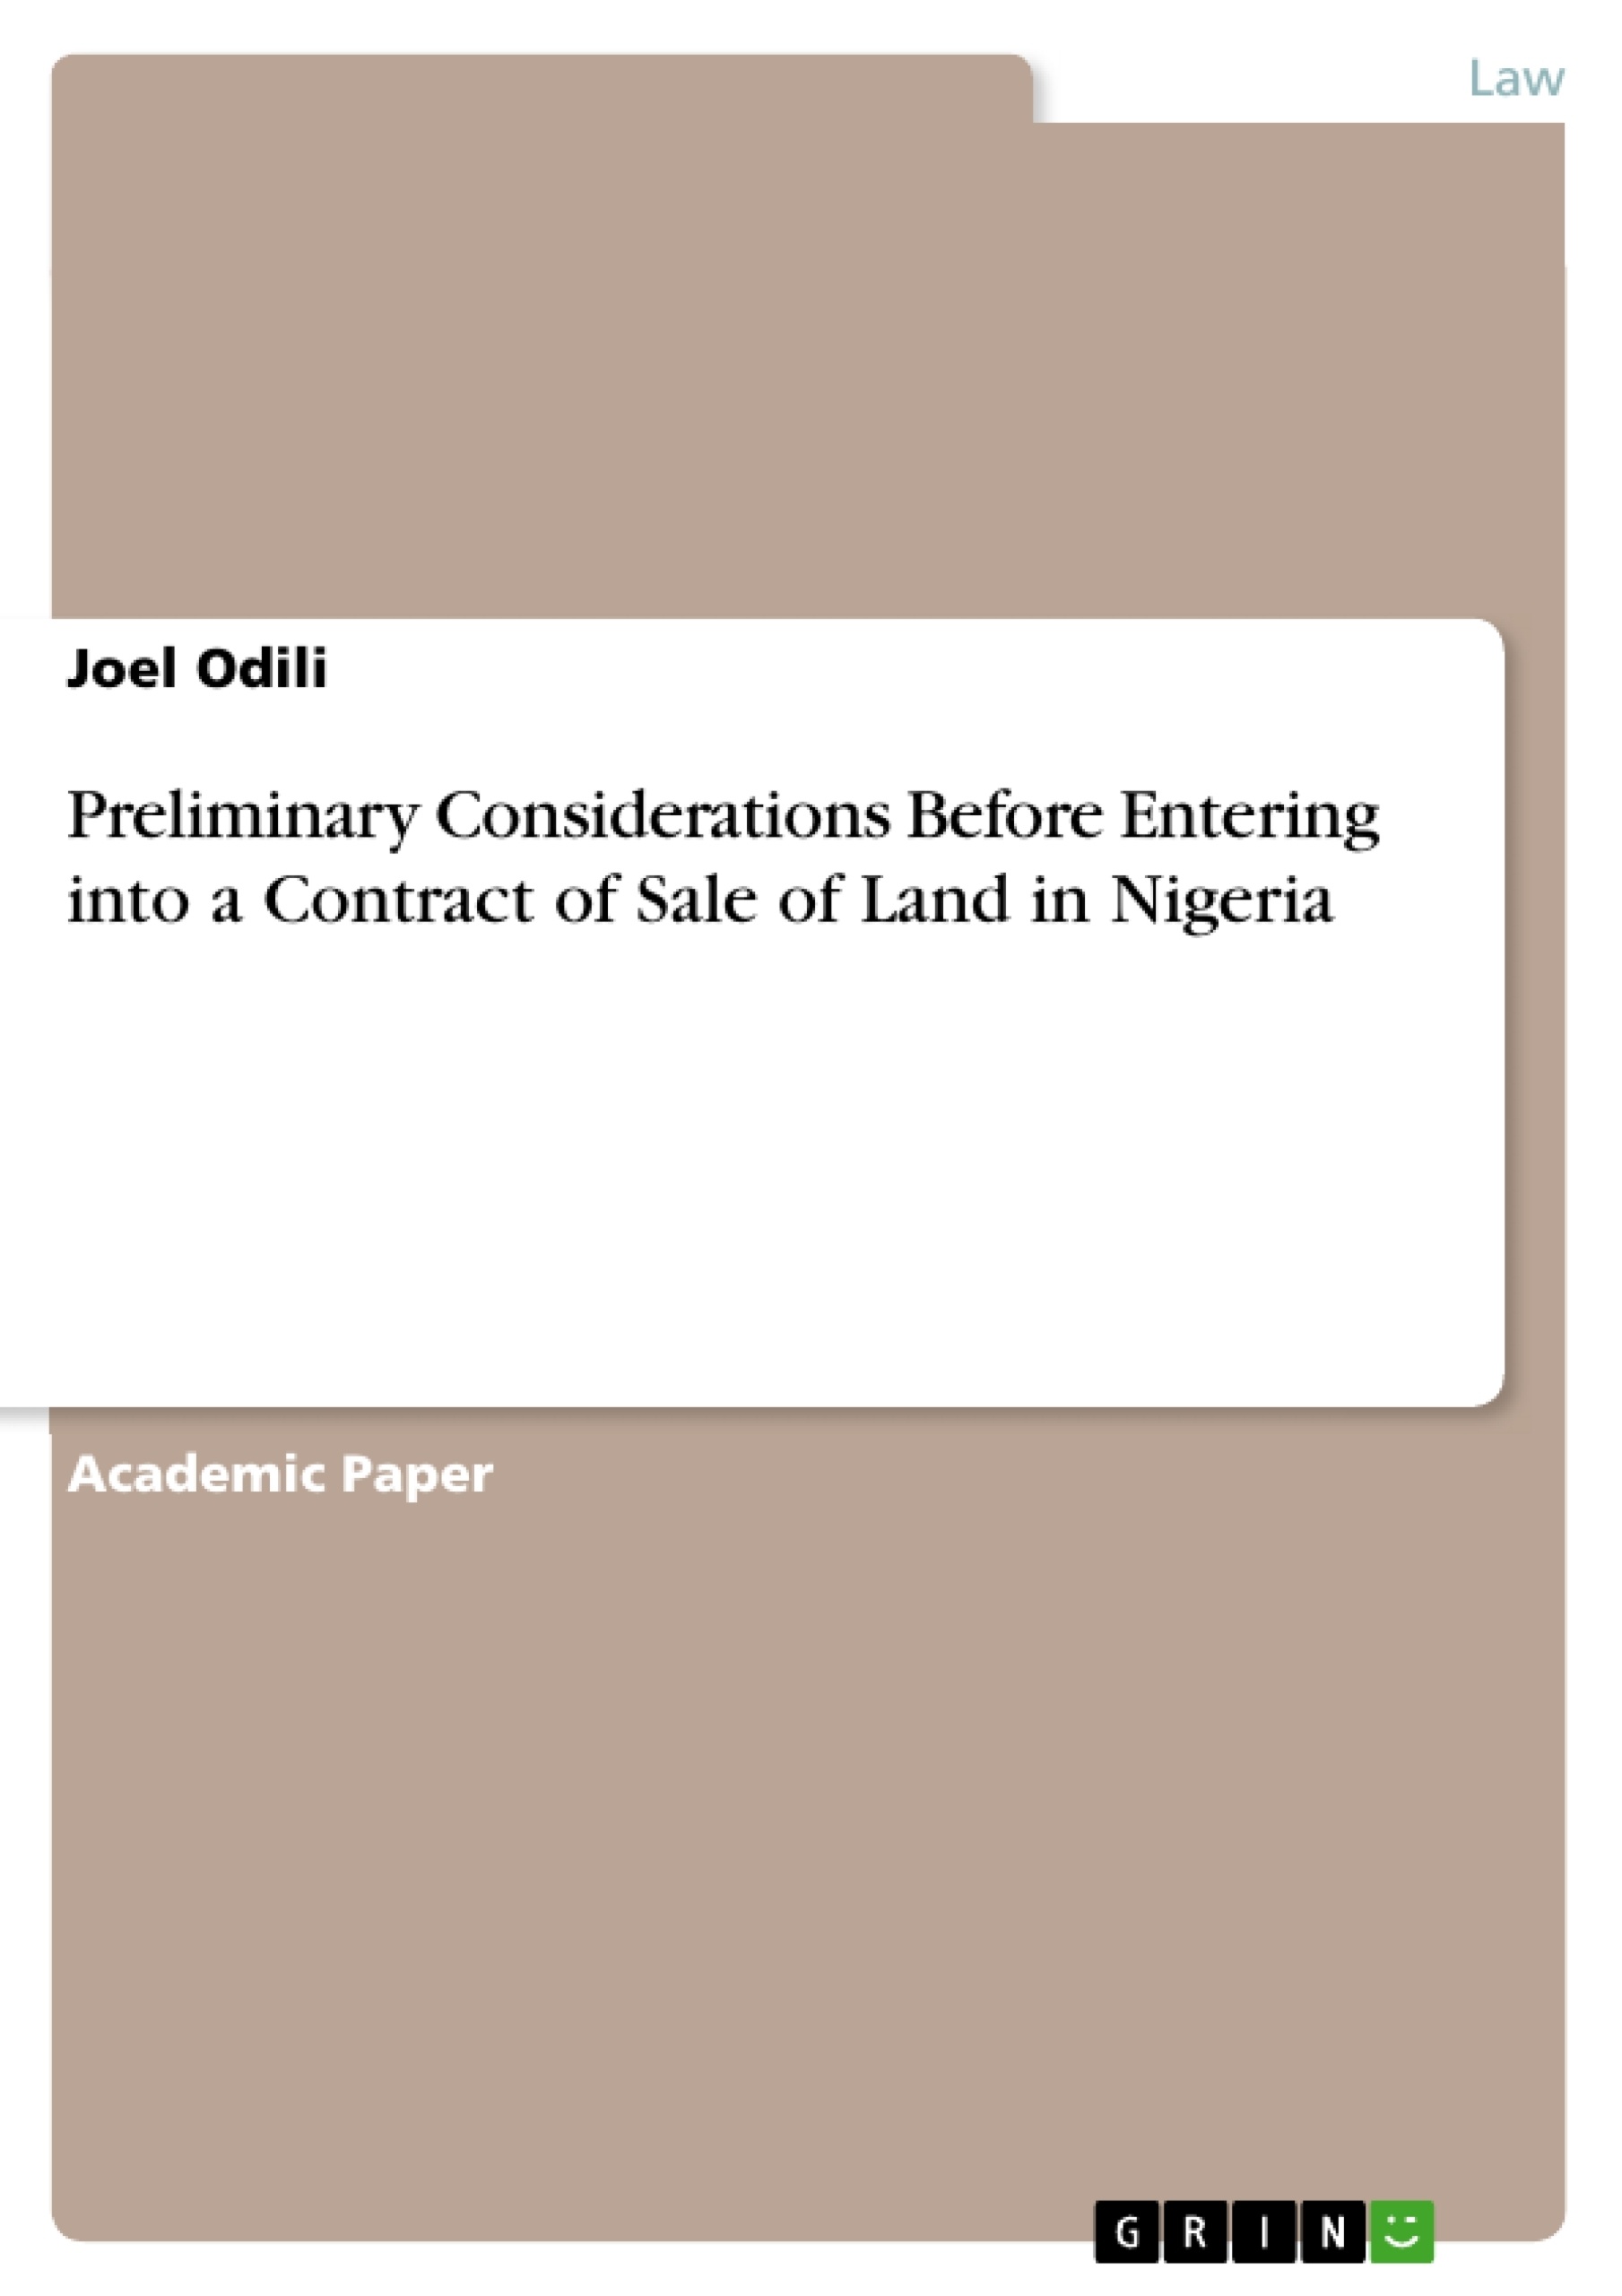 Title: Preliminary Considerations Before Entering into a Contract of Sale of Land in Nigeria